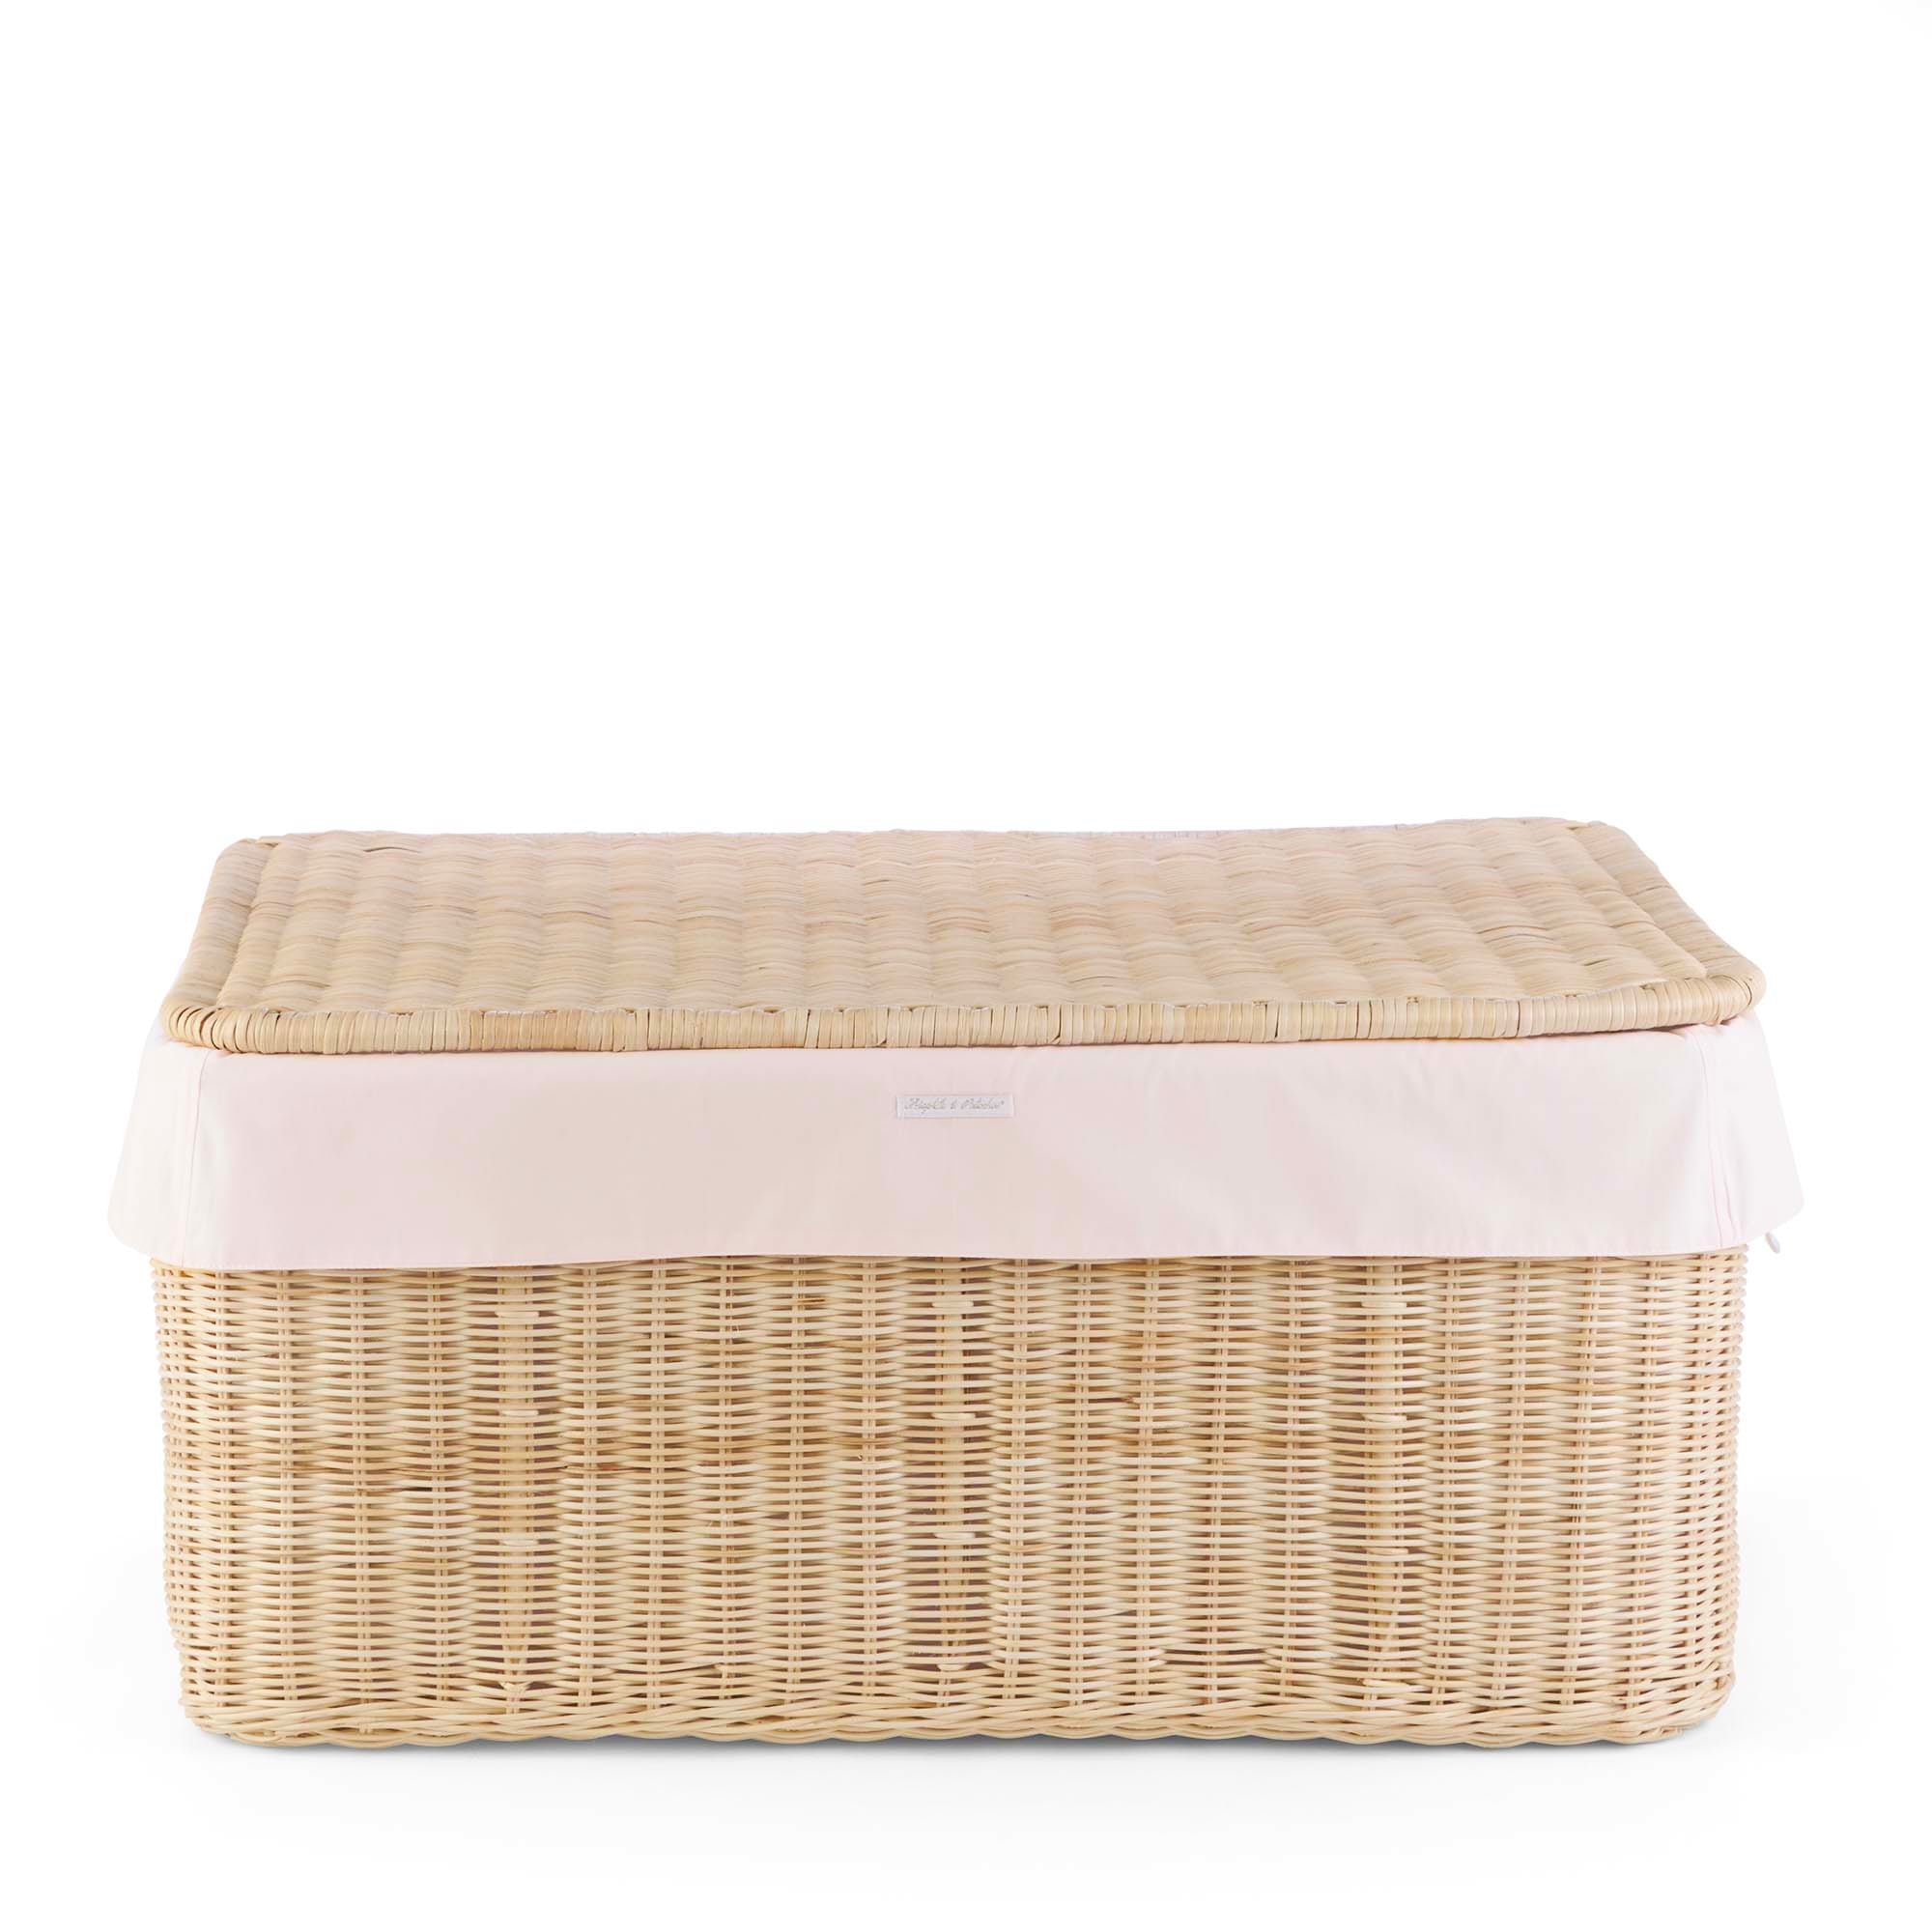 Theophile & Patachou Big Natural Wicker Toy Box and Cover - Cotton Pink